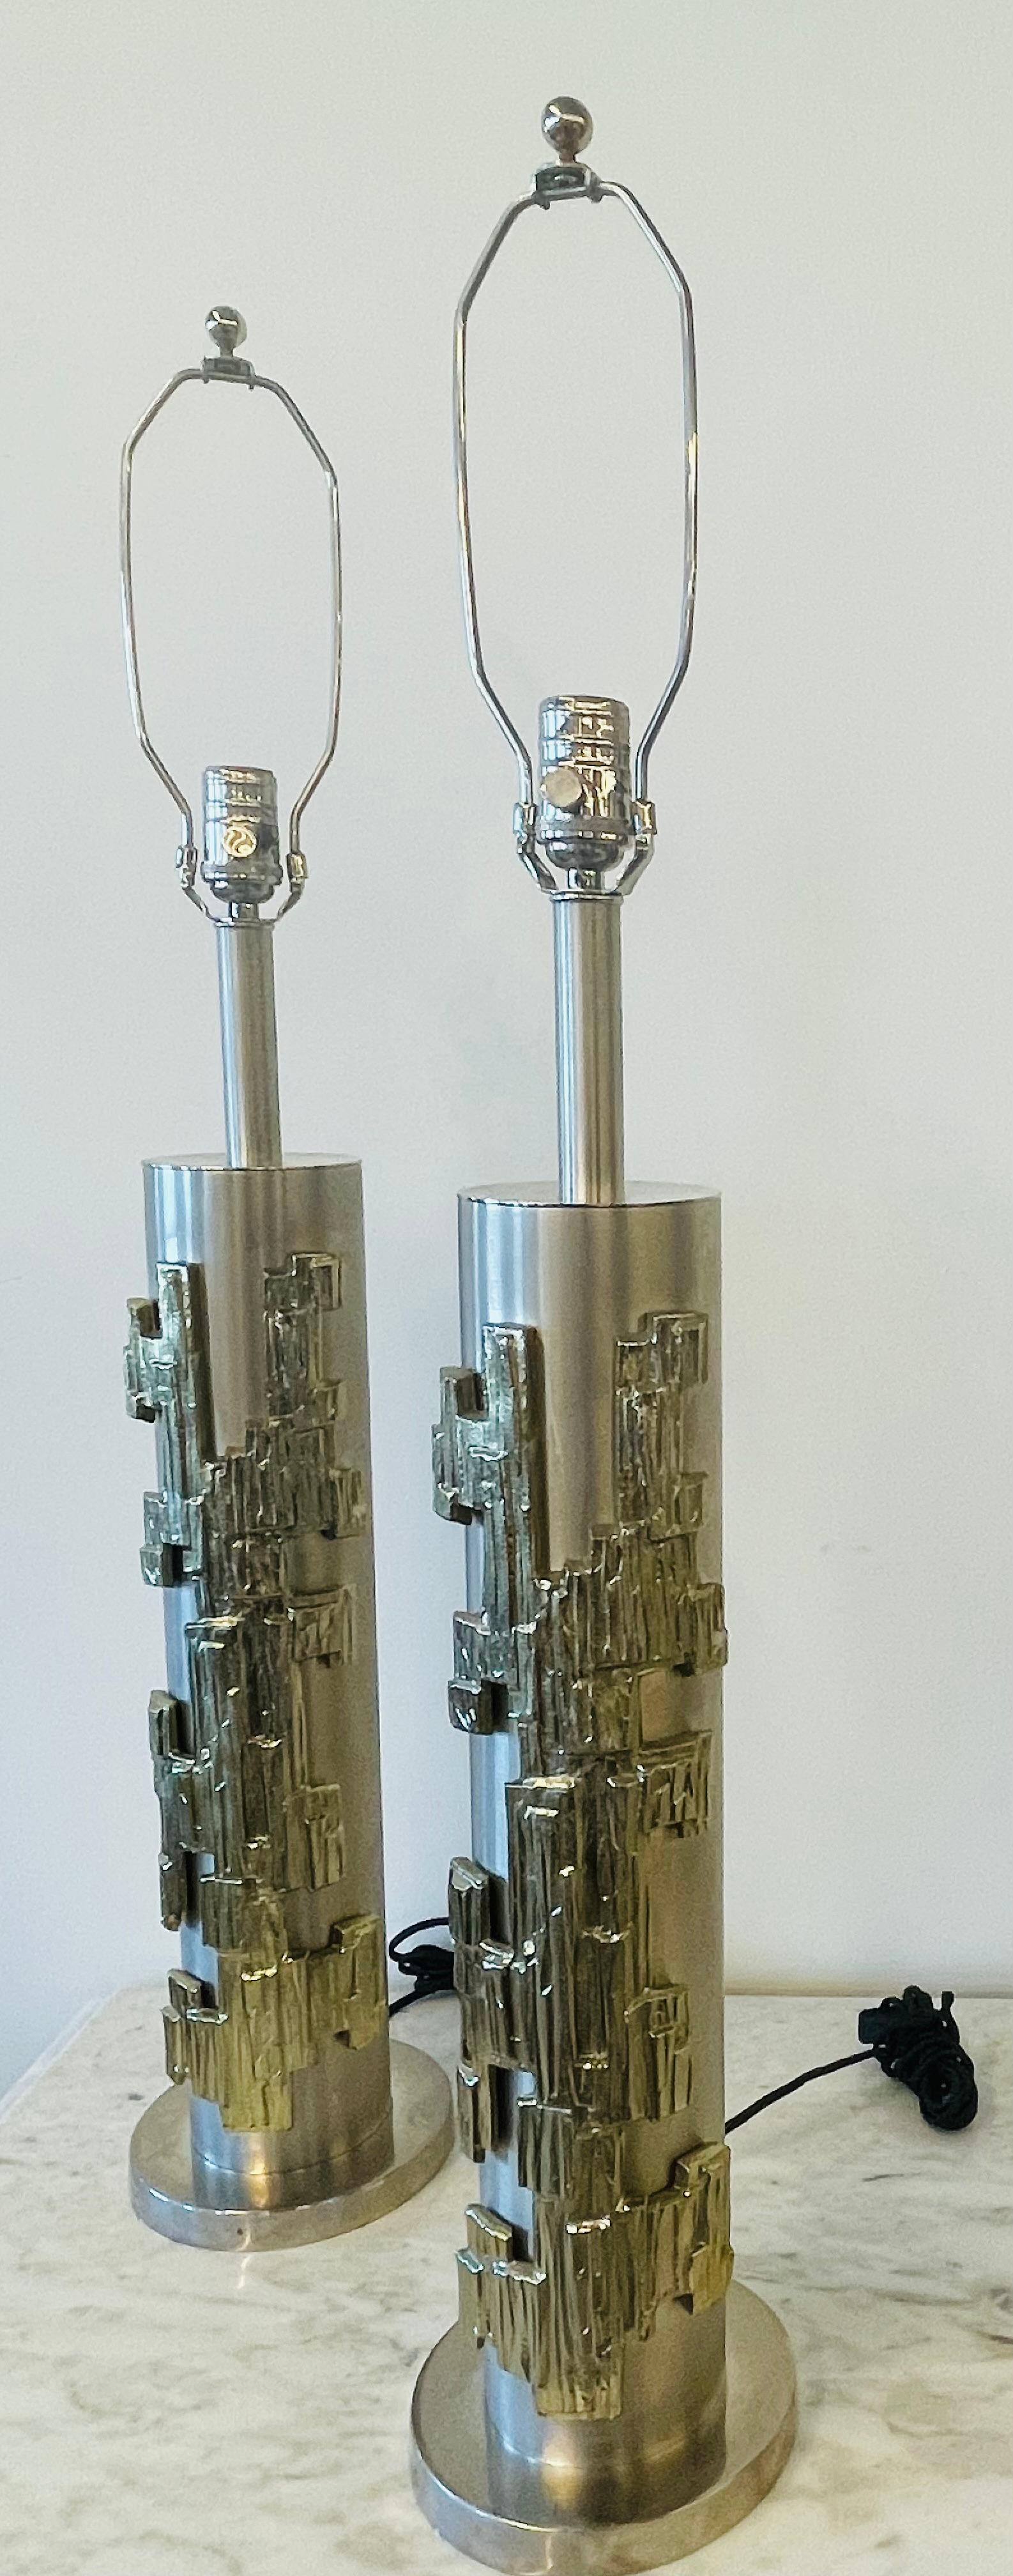 Pair of Modernist Table Lamps, Brushed Nickel and Sculptural Metal, 1970s For Sale 5